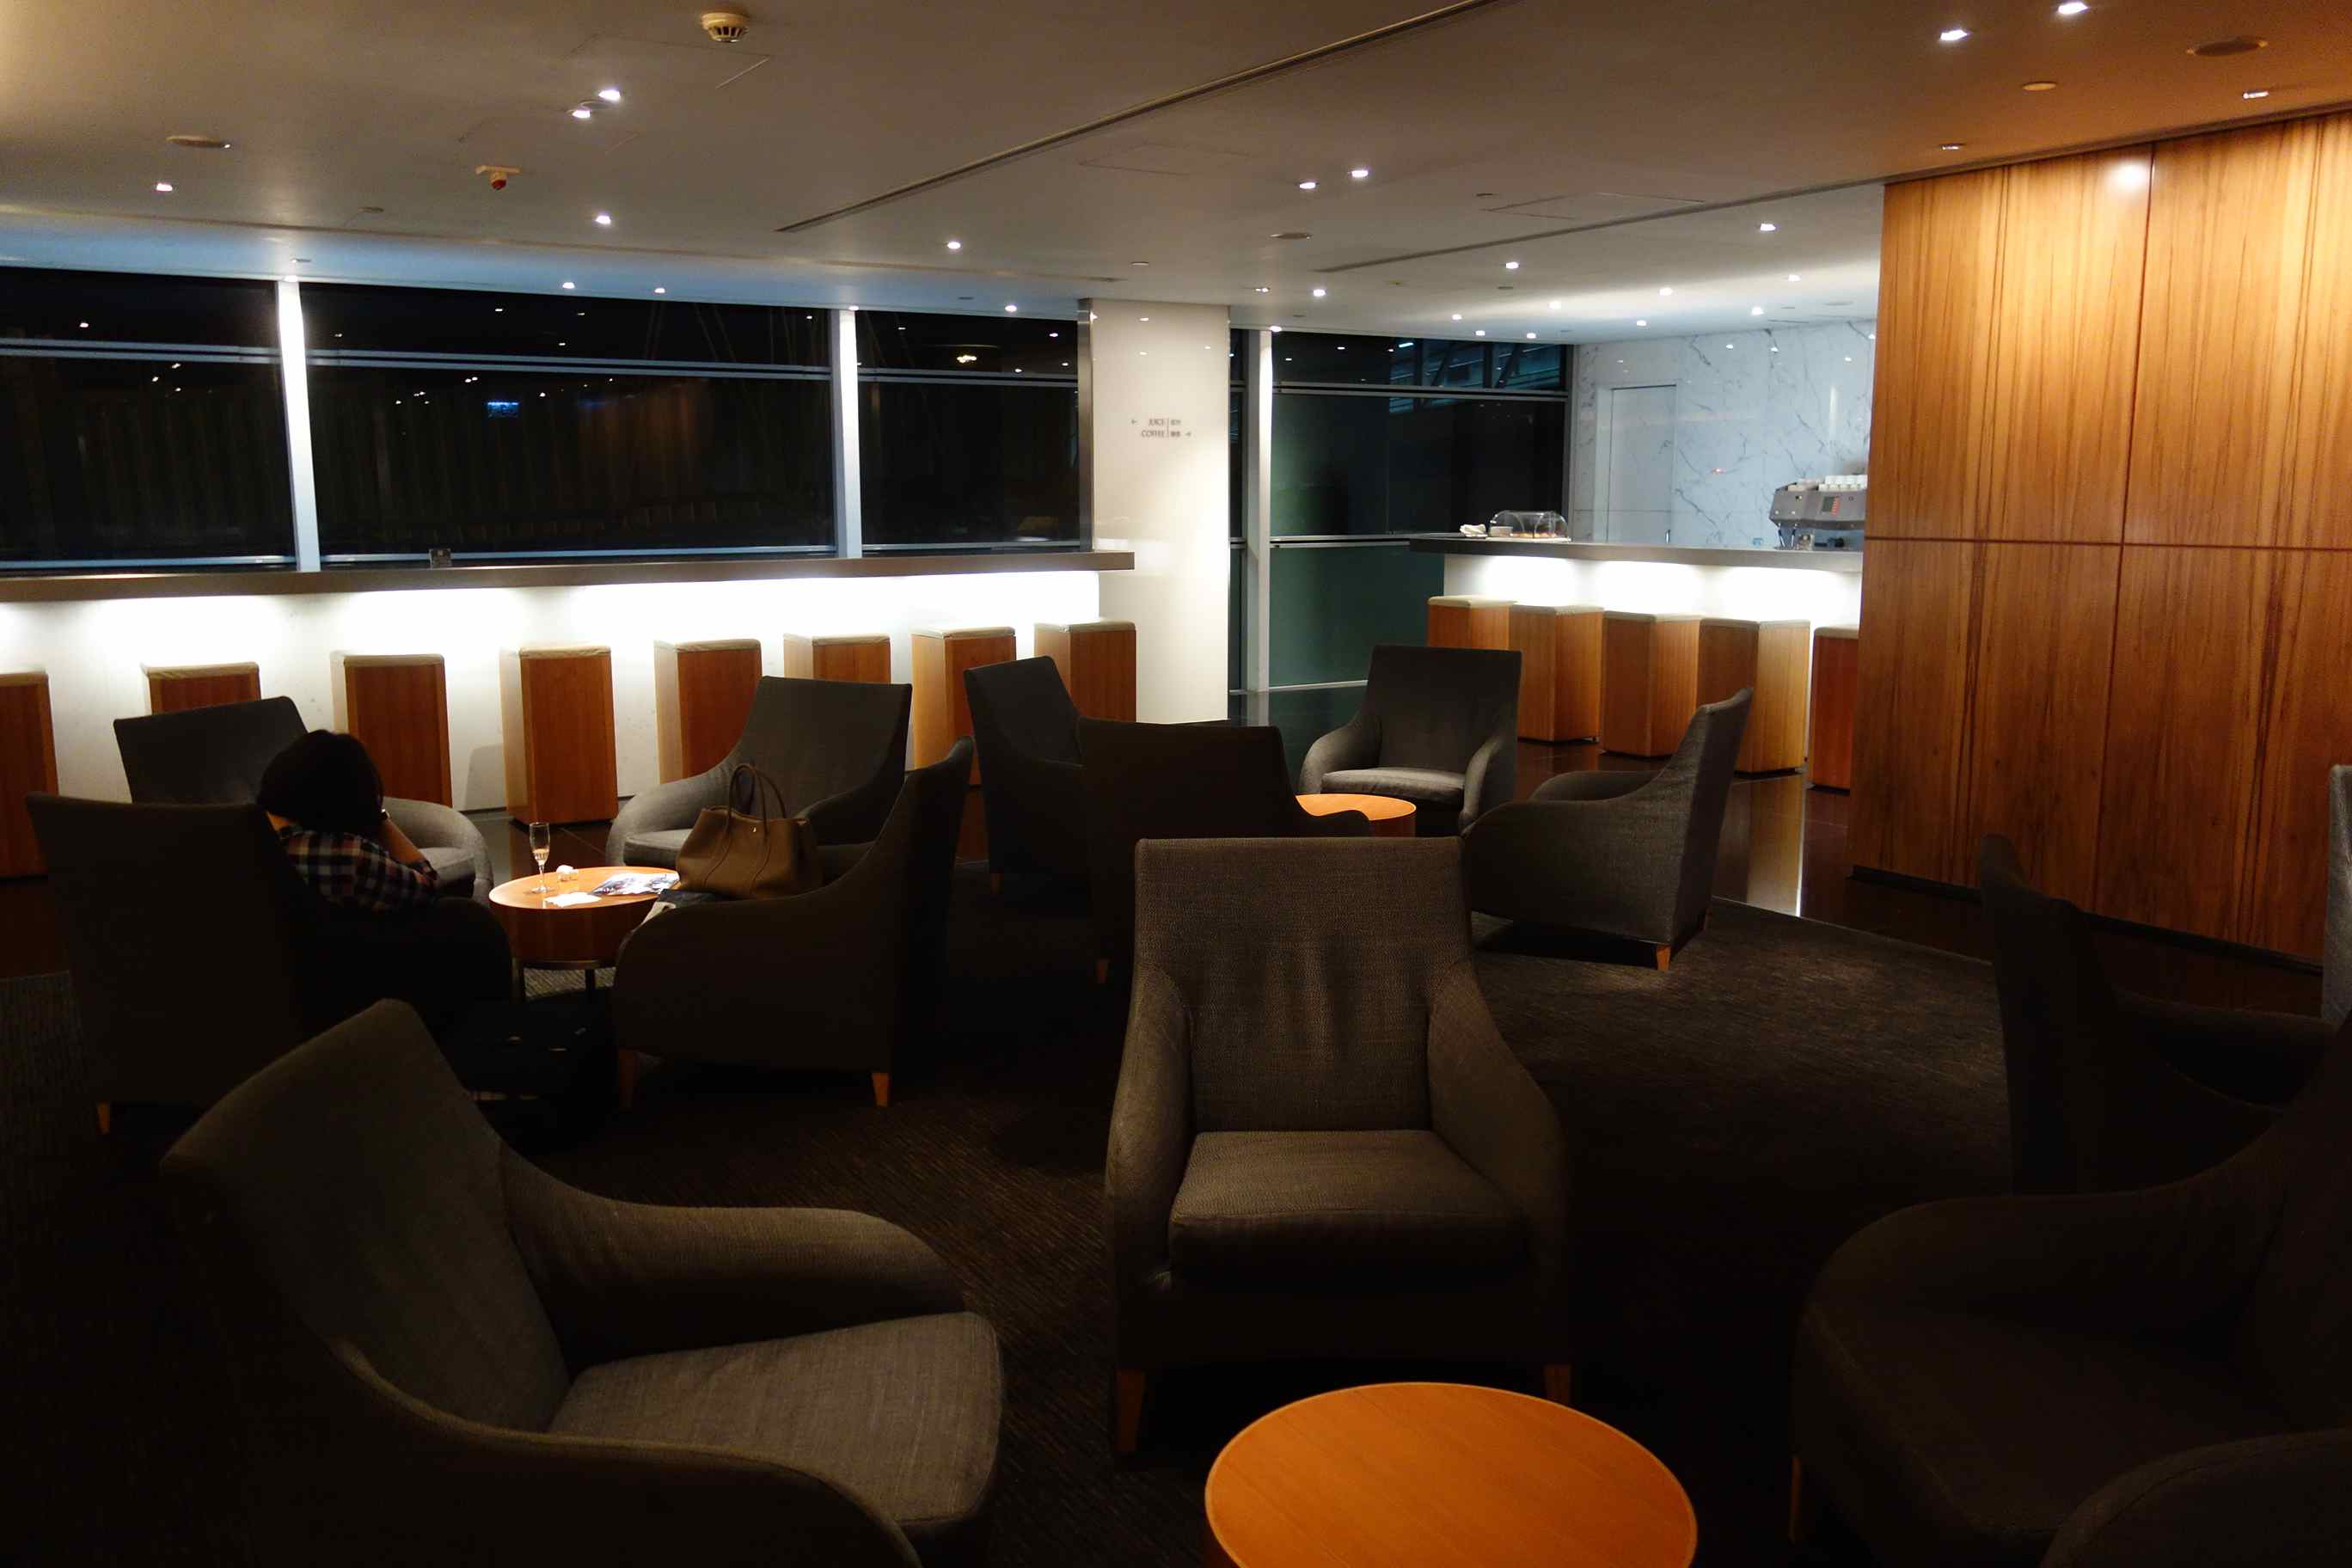 Seating in the lounge